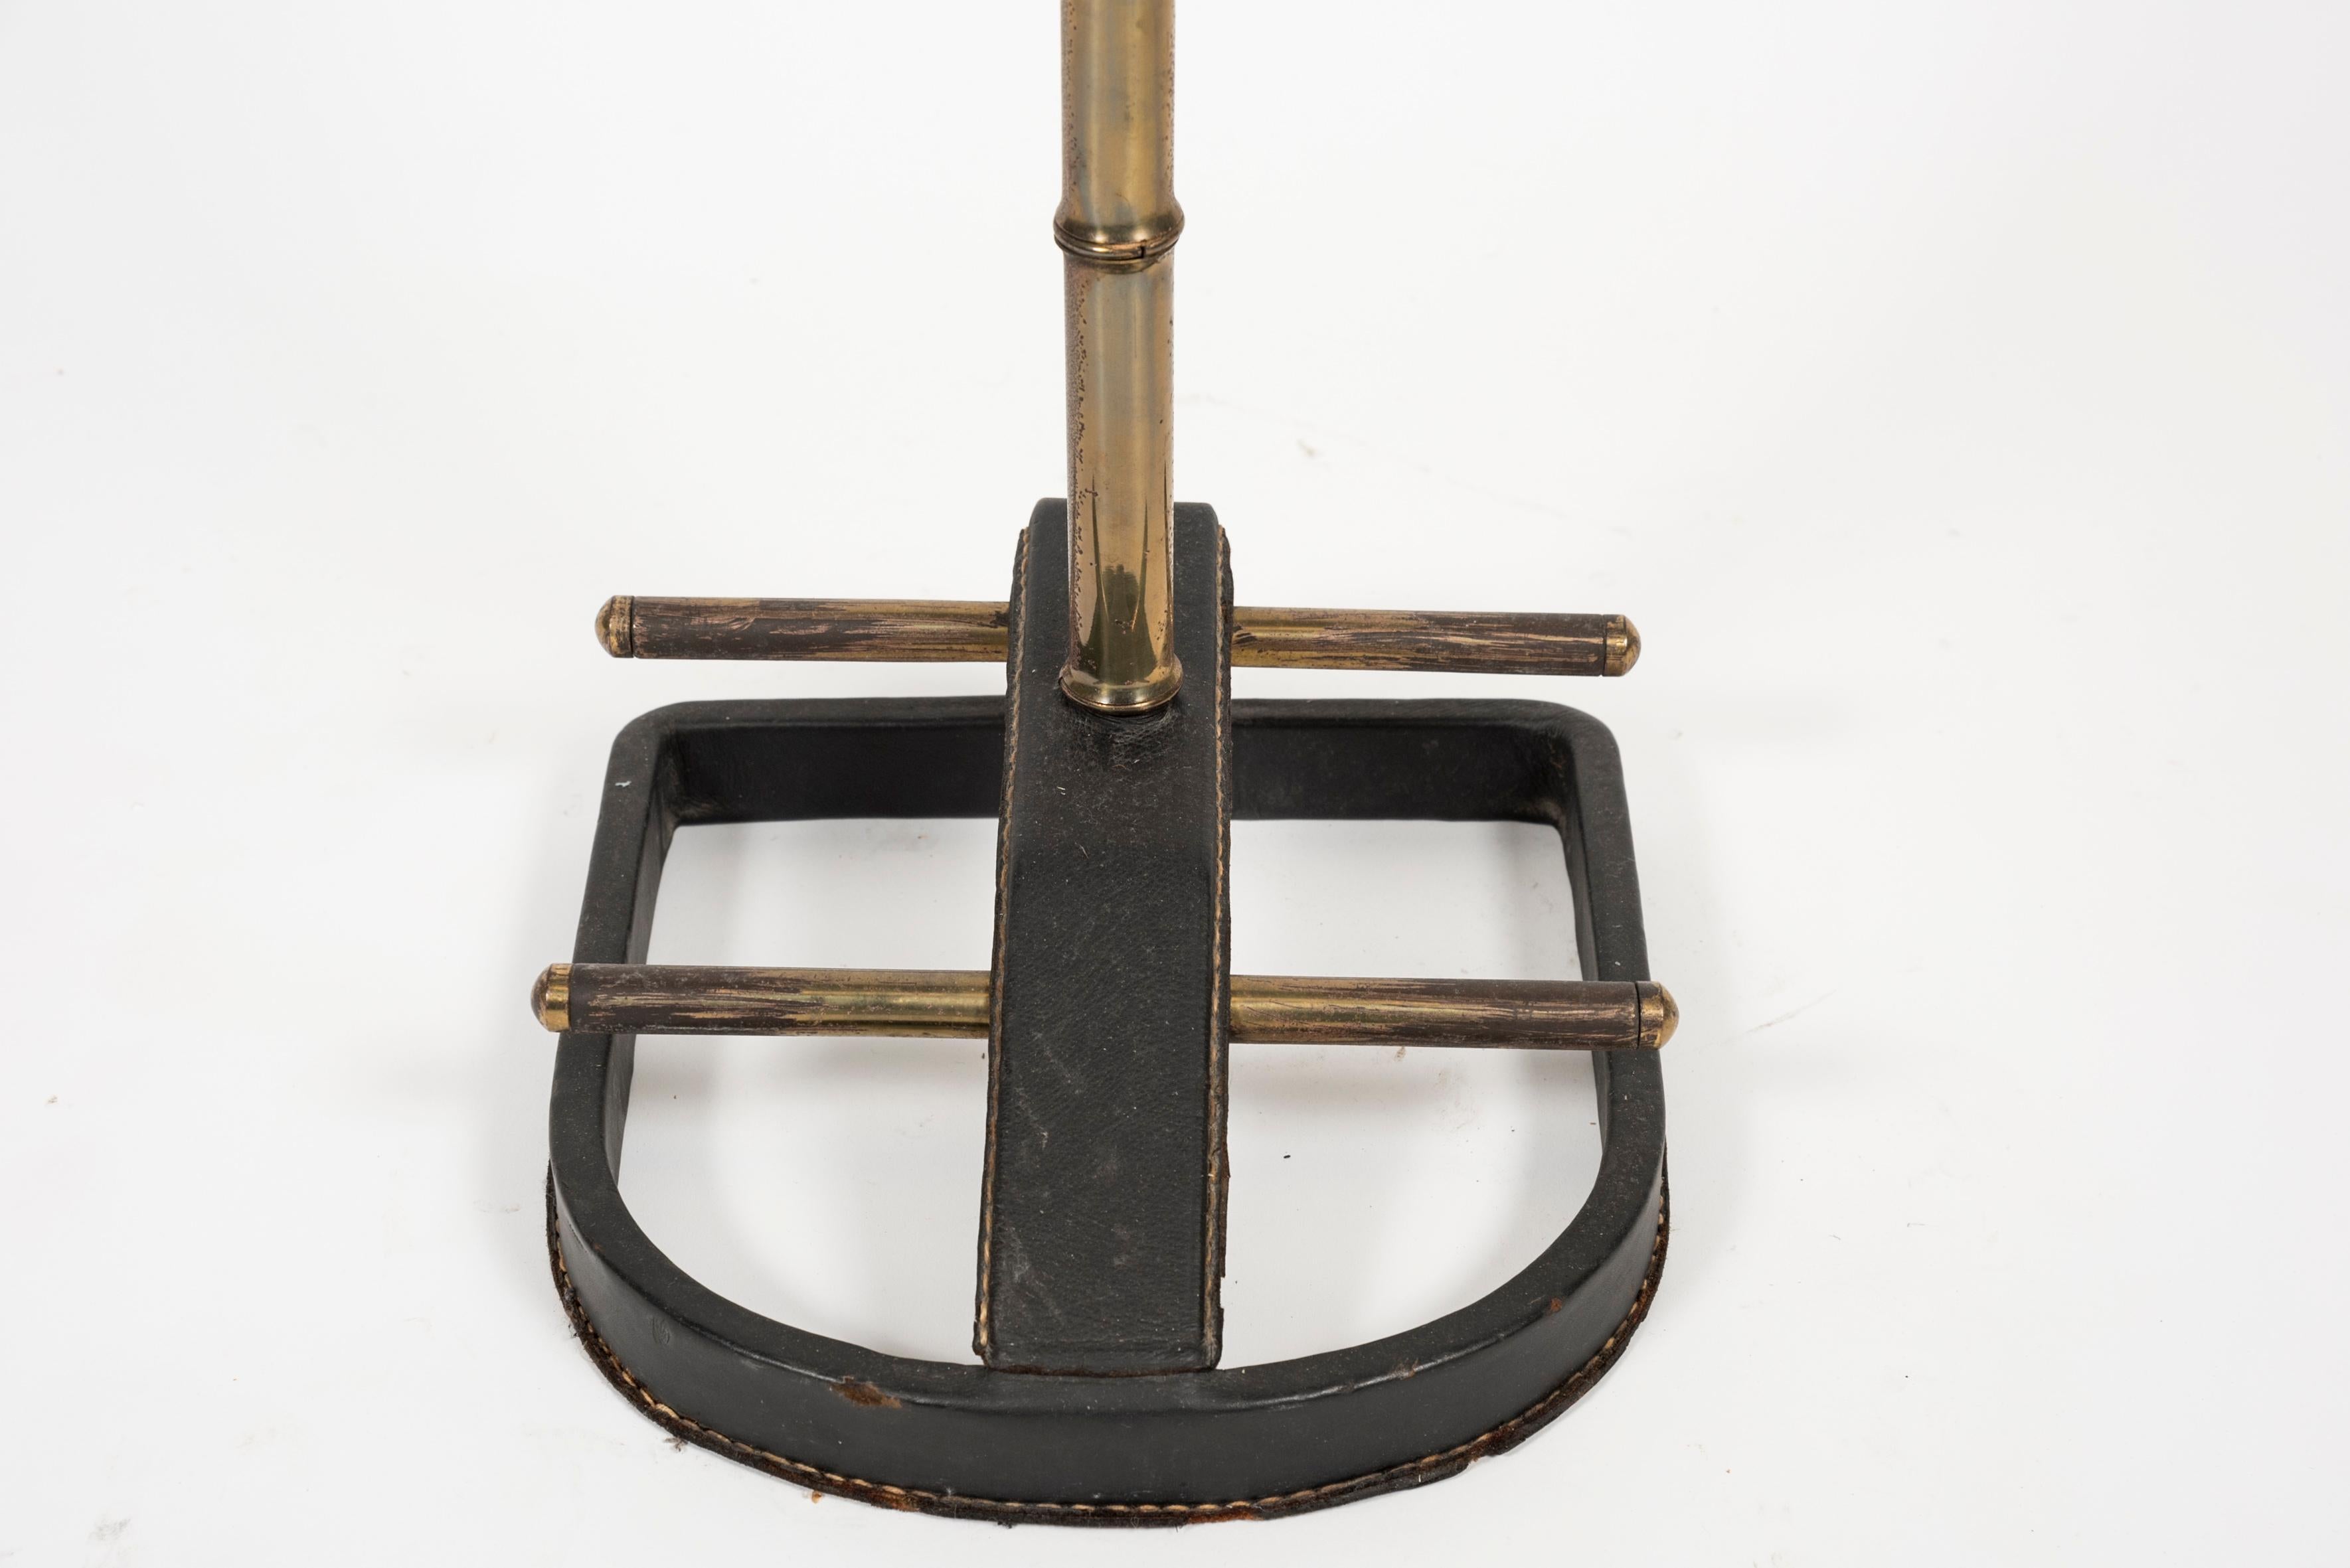 1950s Stitched Leather Valet by Jacques Adnet In Good Condition For Sale In Bois-Colombes, FR